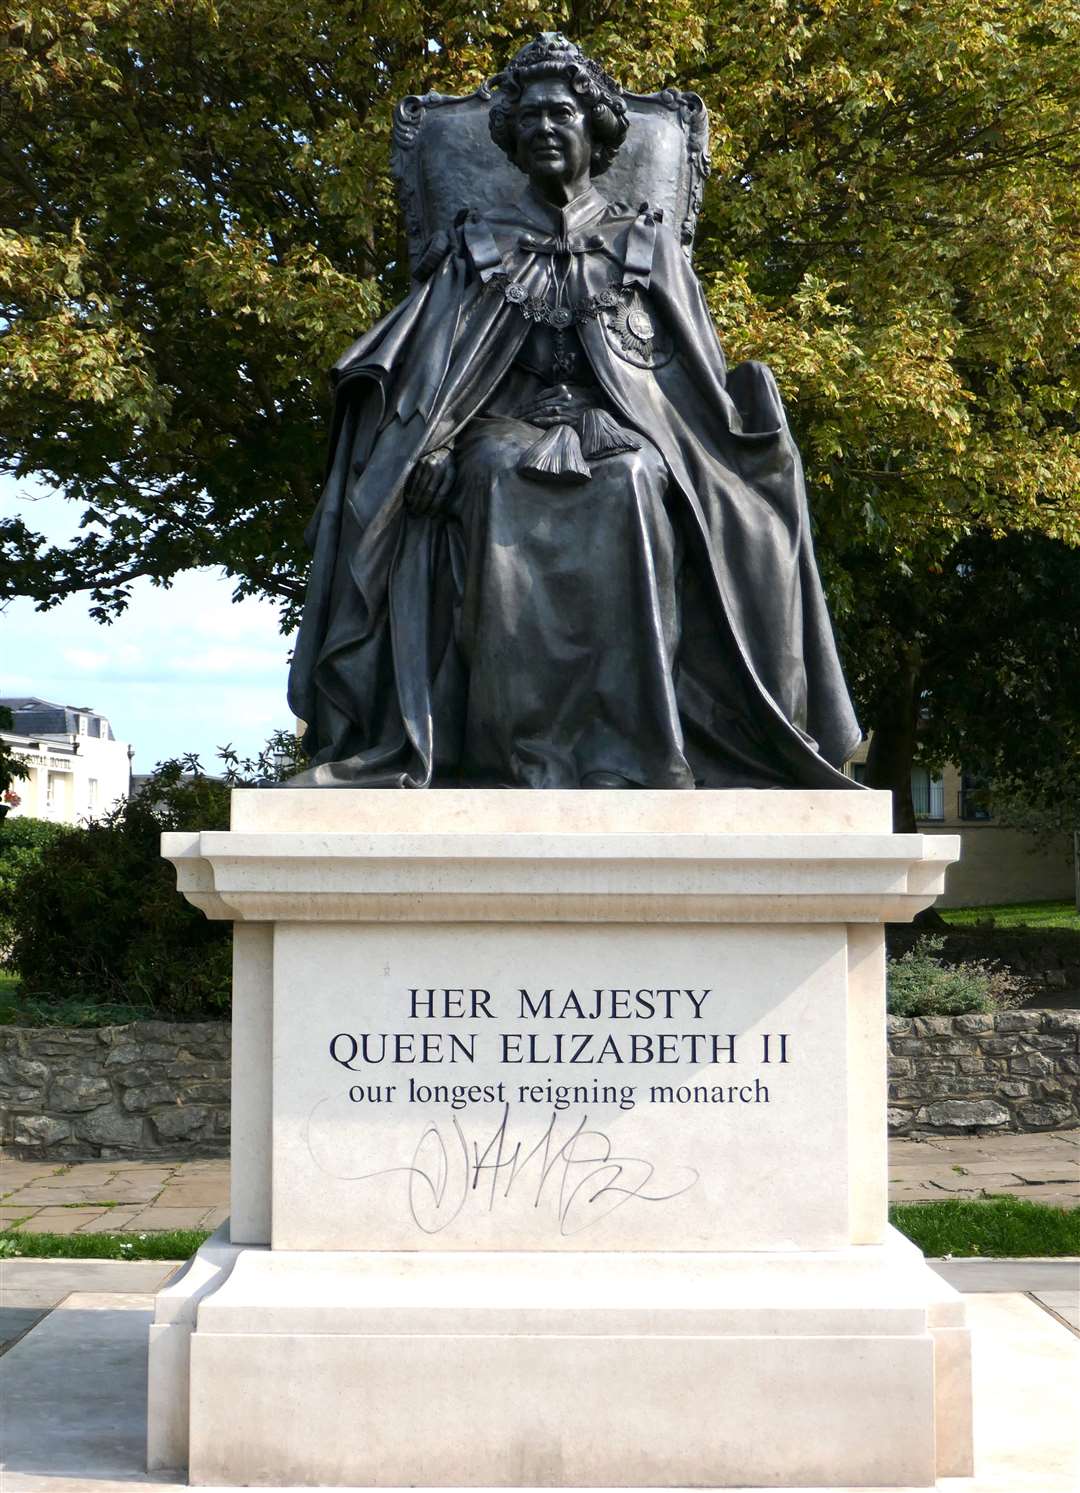 Statue of The Queen in St Andrew's Gardens, Gravesend, vandalised